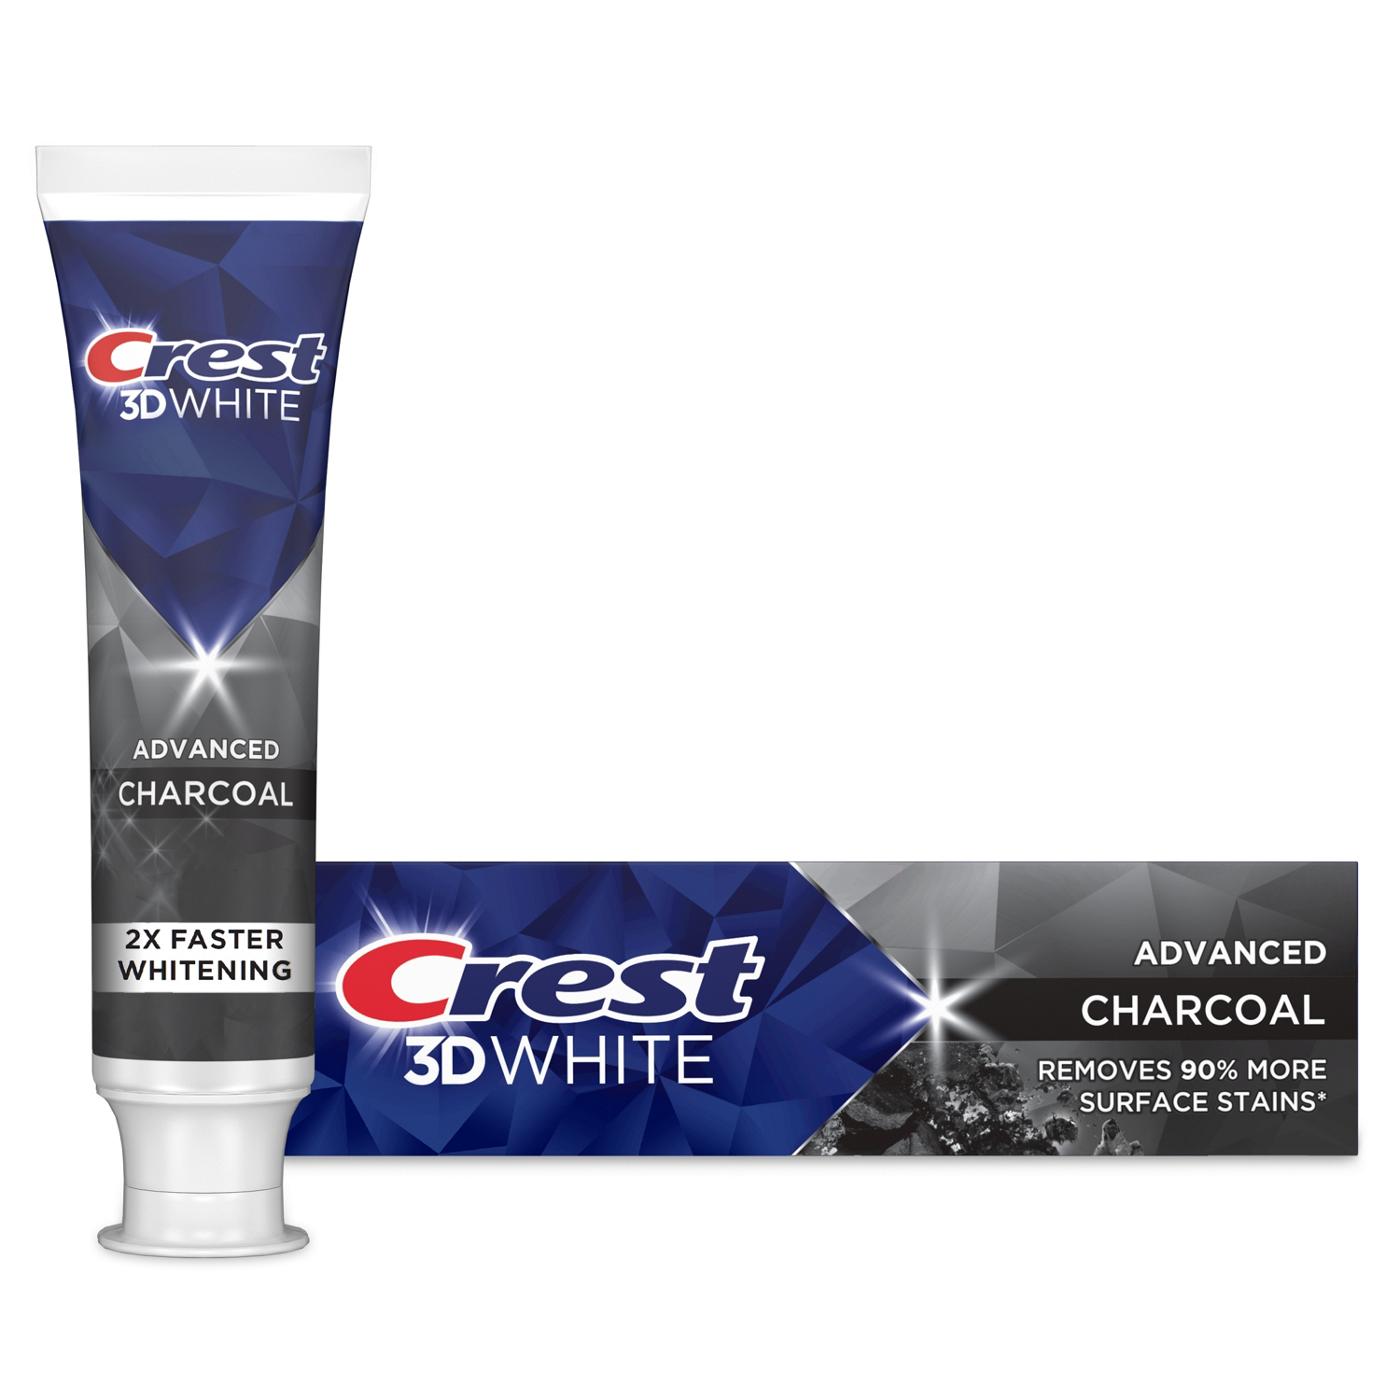 Crest 3D White Whitening Toothpaste - Charcoal; image 6 of 7